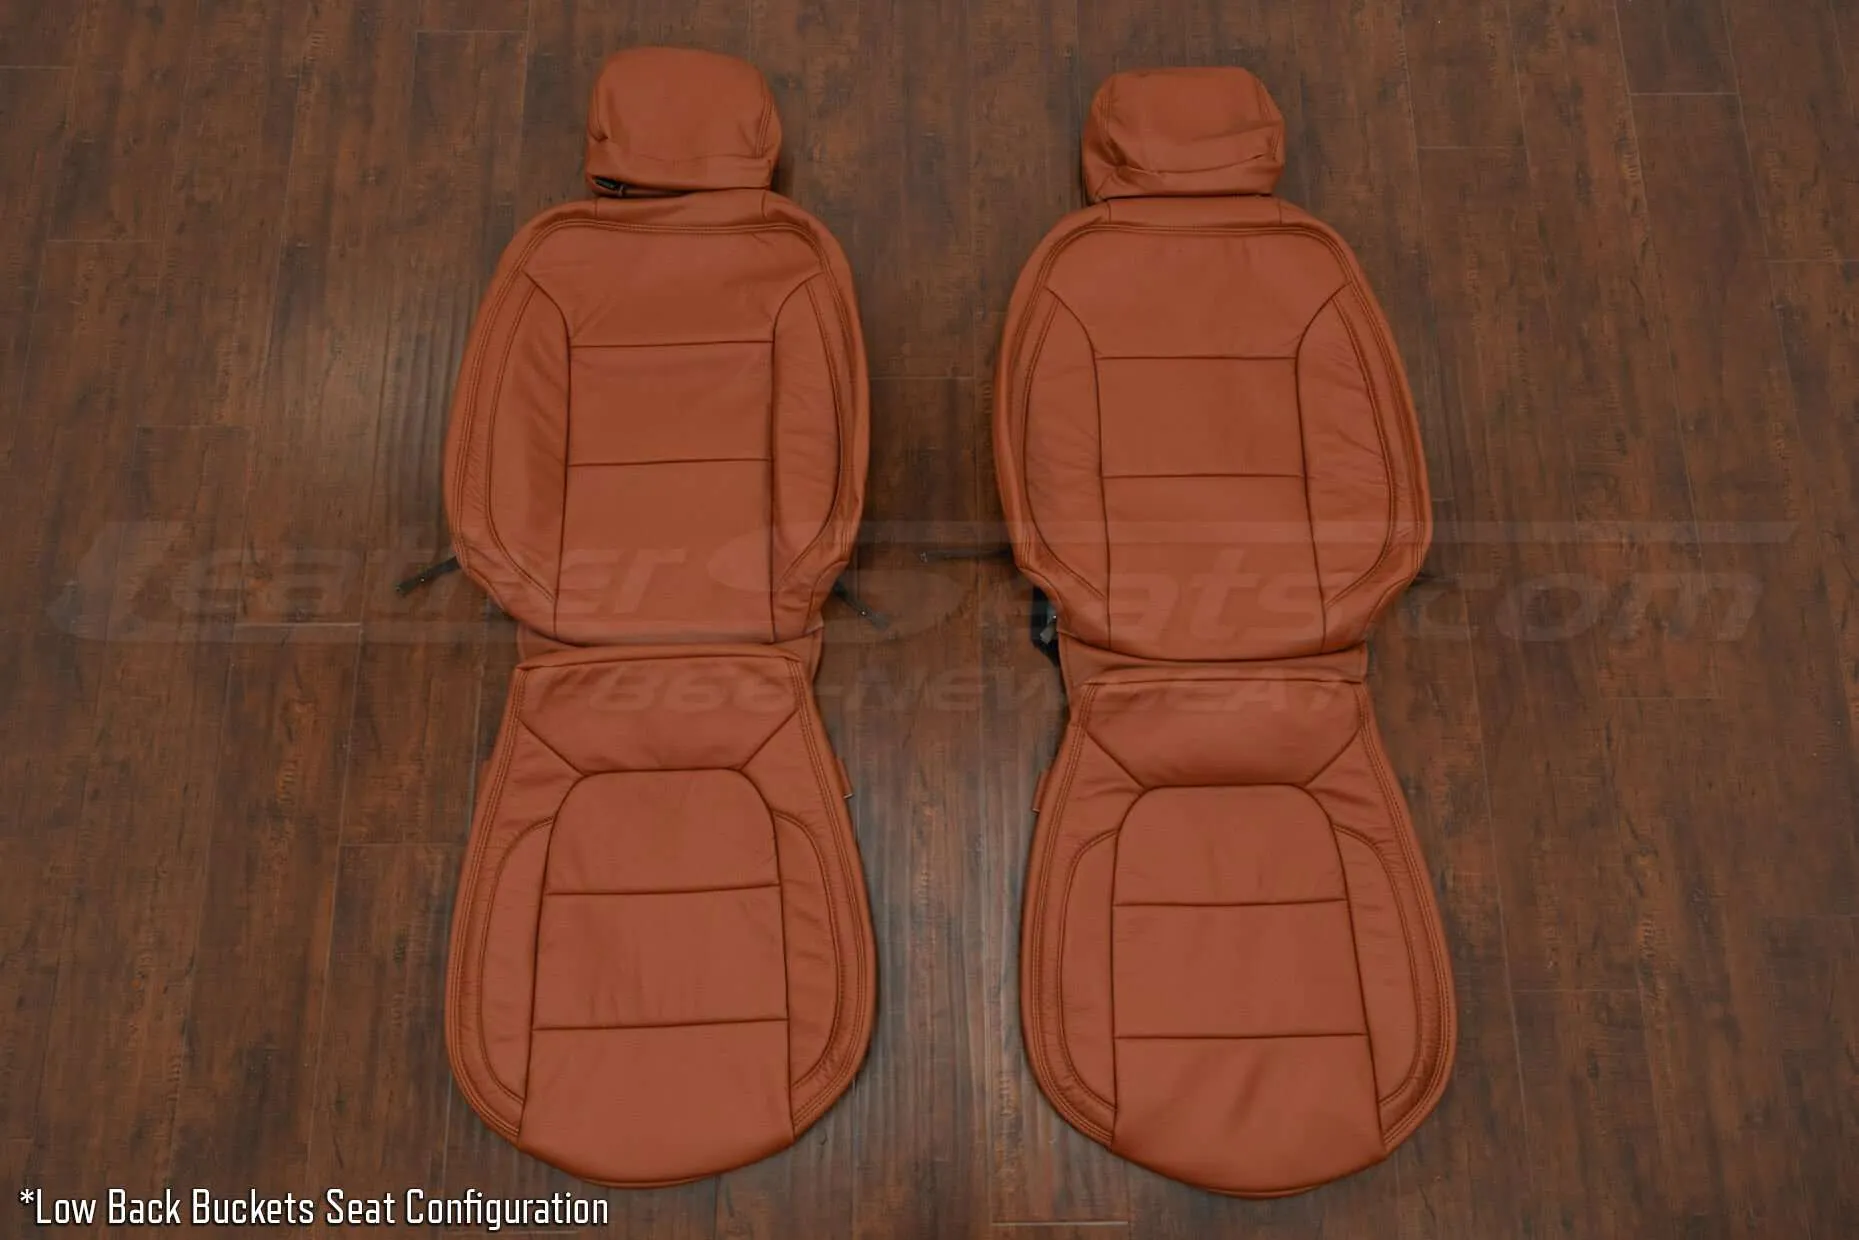 Chevy Silverado Leather Seat Kit - Mitt Brown - Low Back Buckets seat configuration